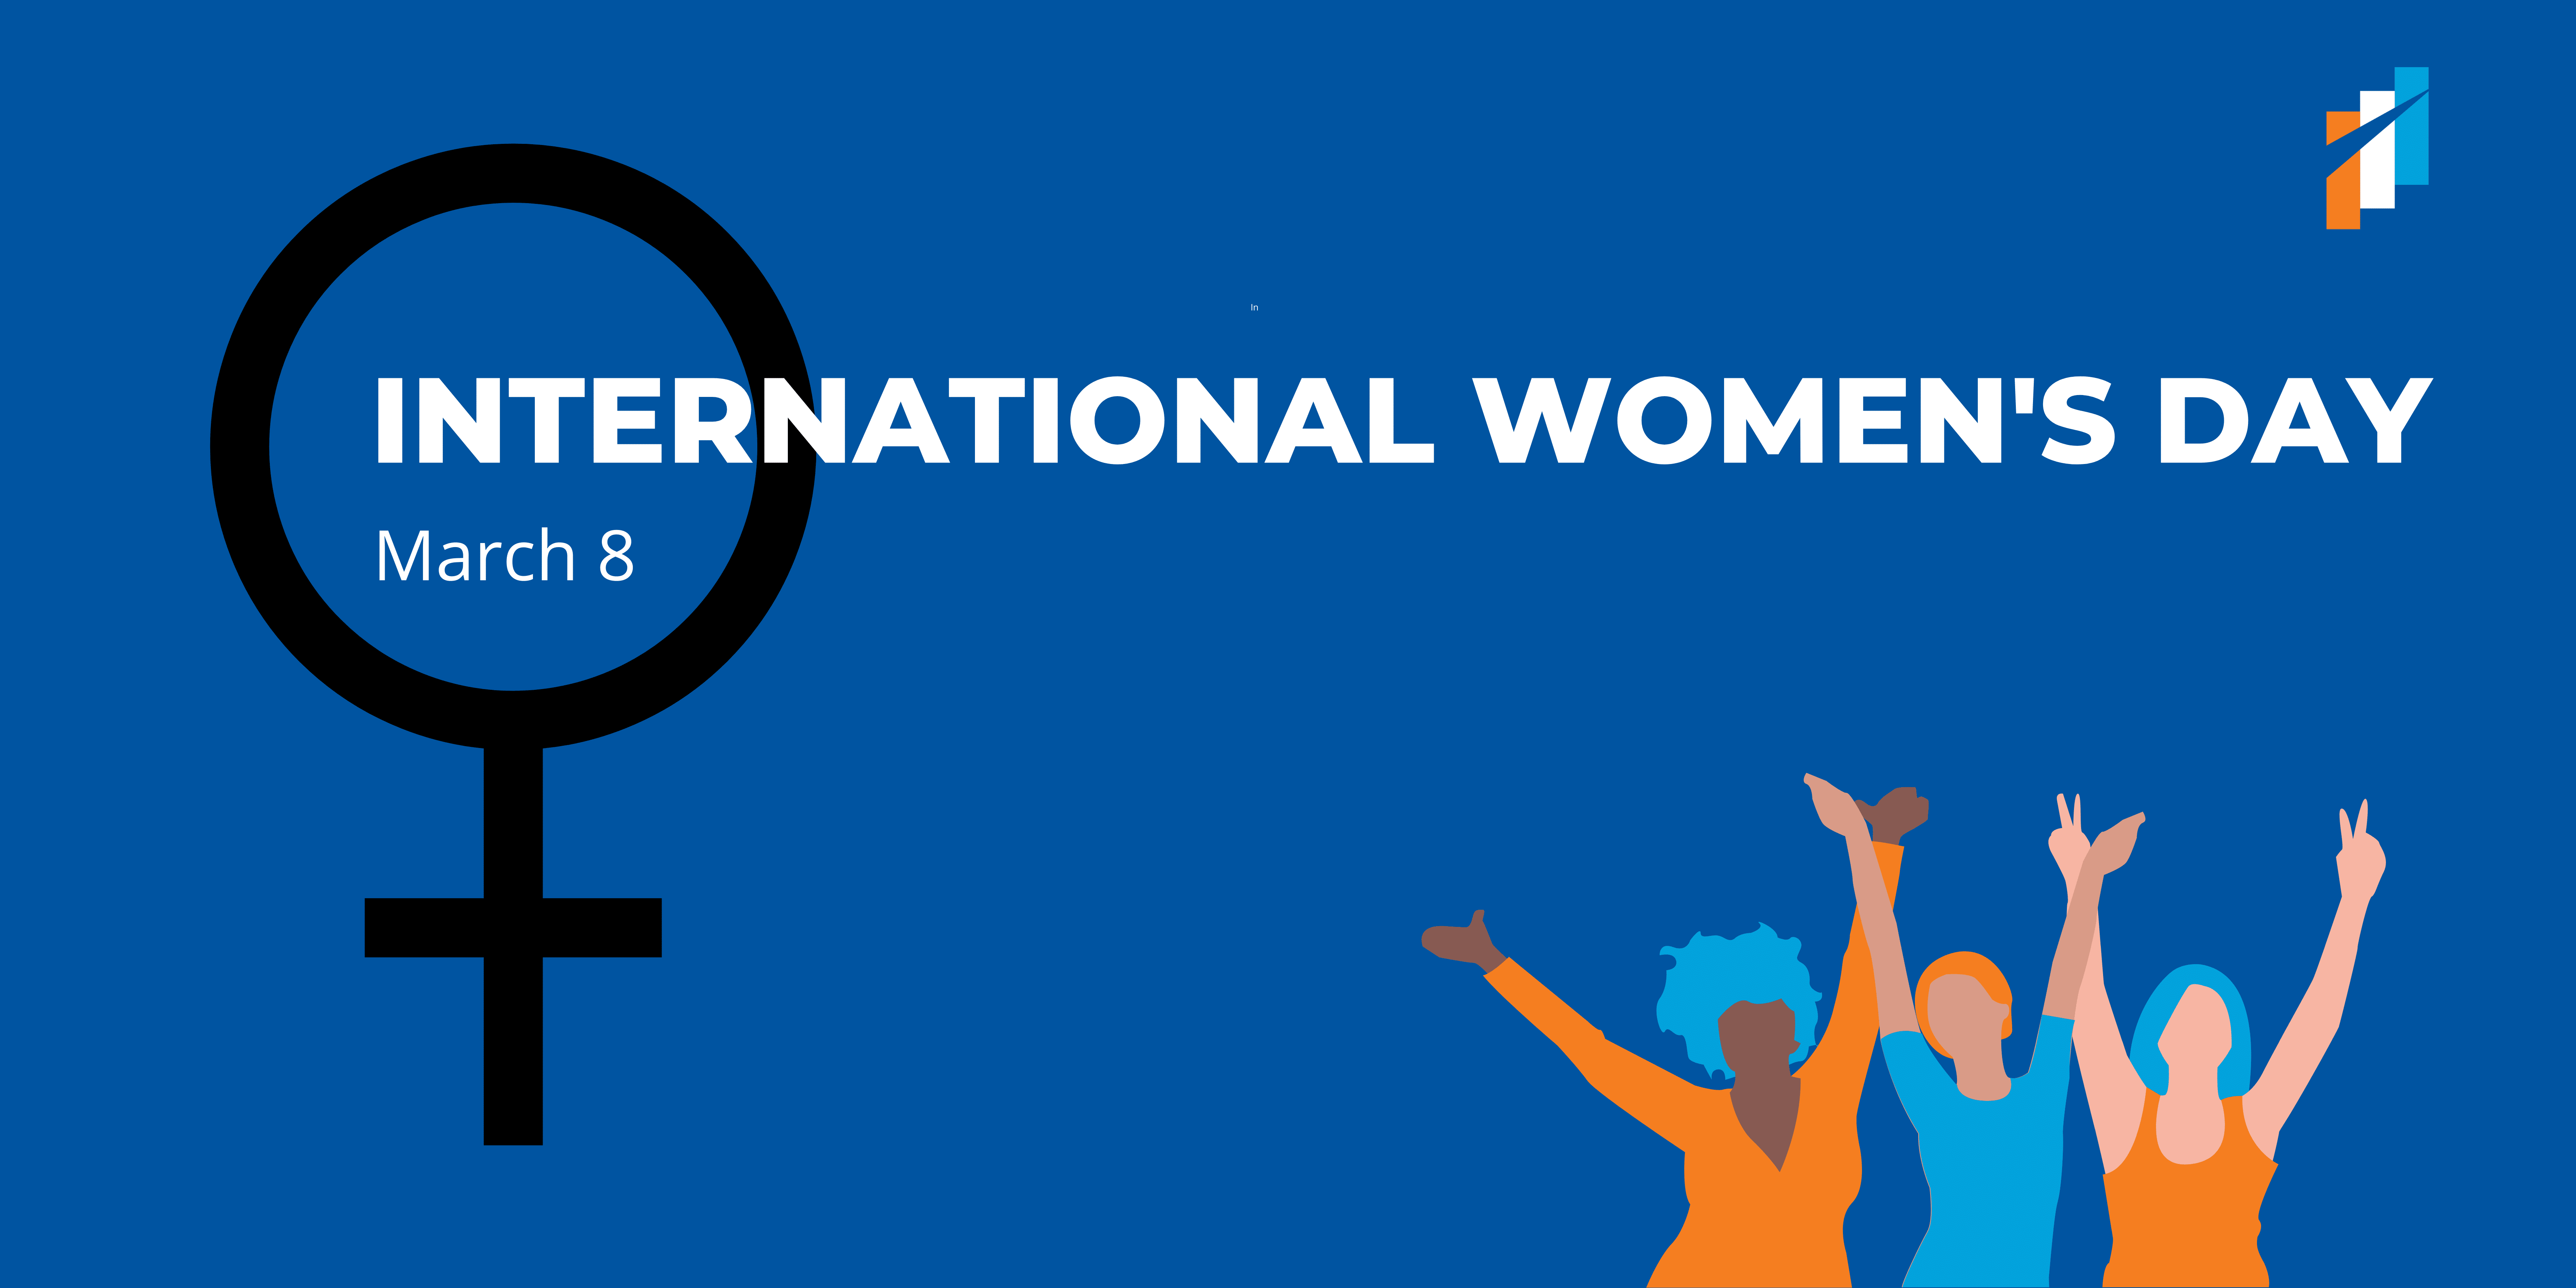 In Celebration of International Women’s Day, Get to Know Some BARR Movers and Shakers